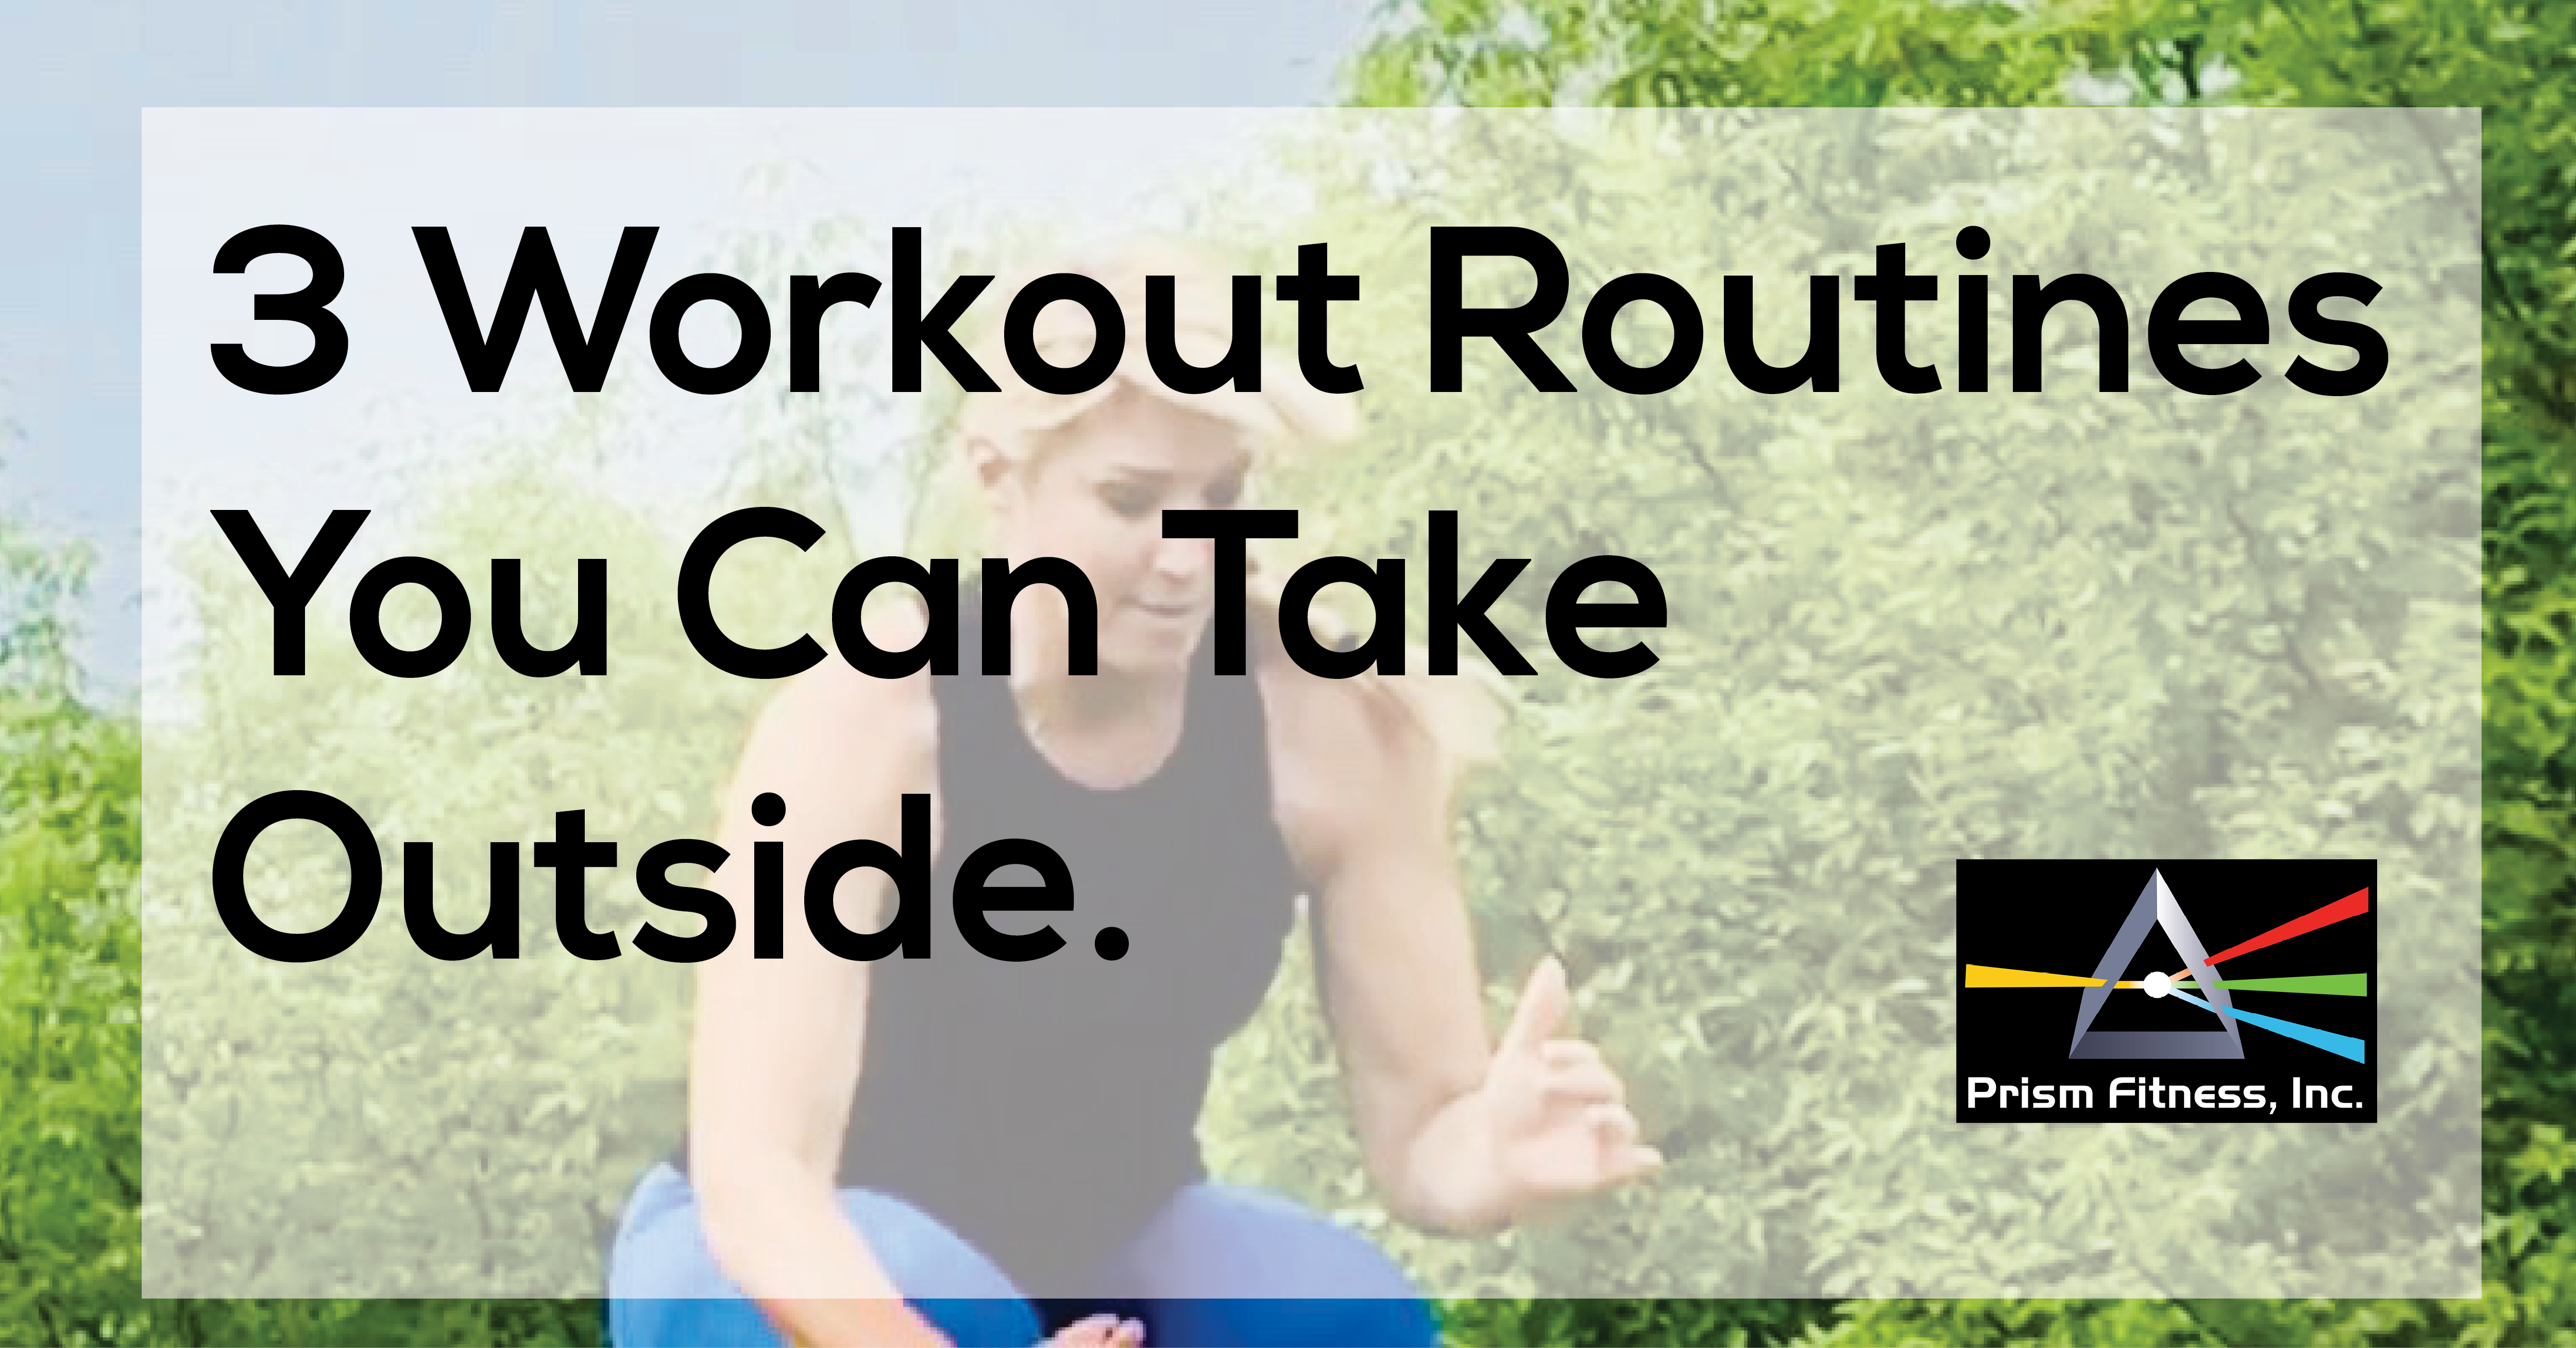 3 Workout Routines You Can Take Outside